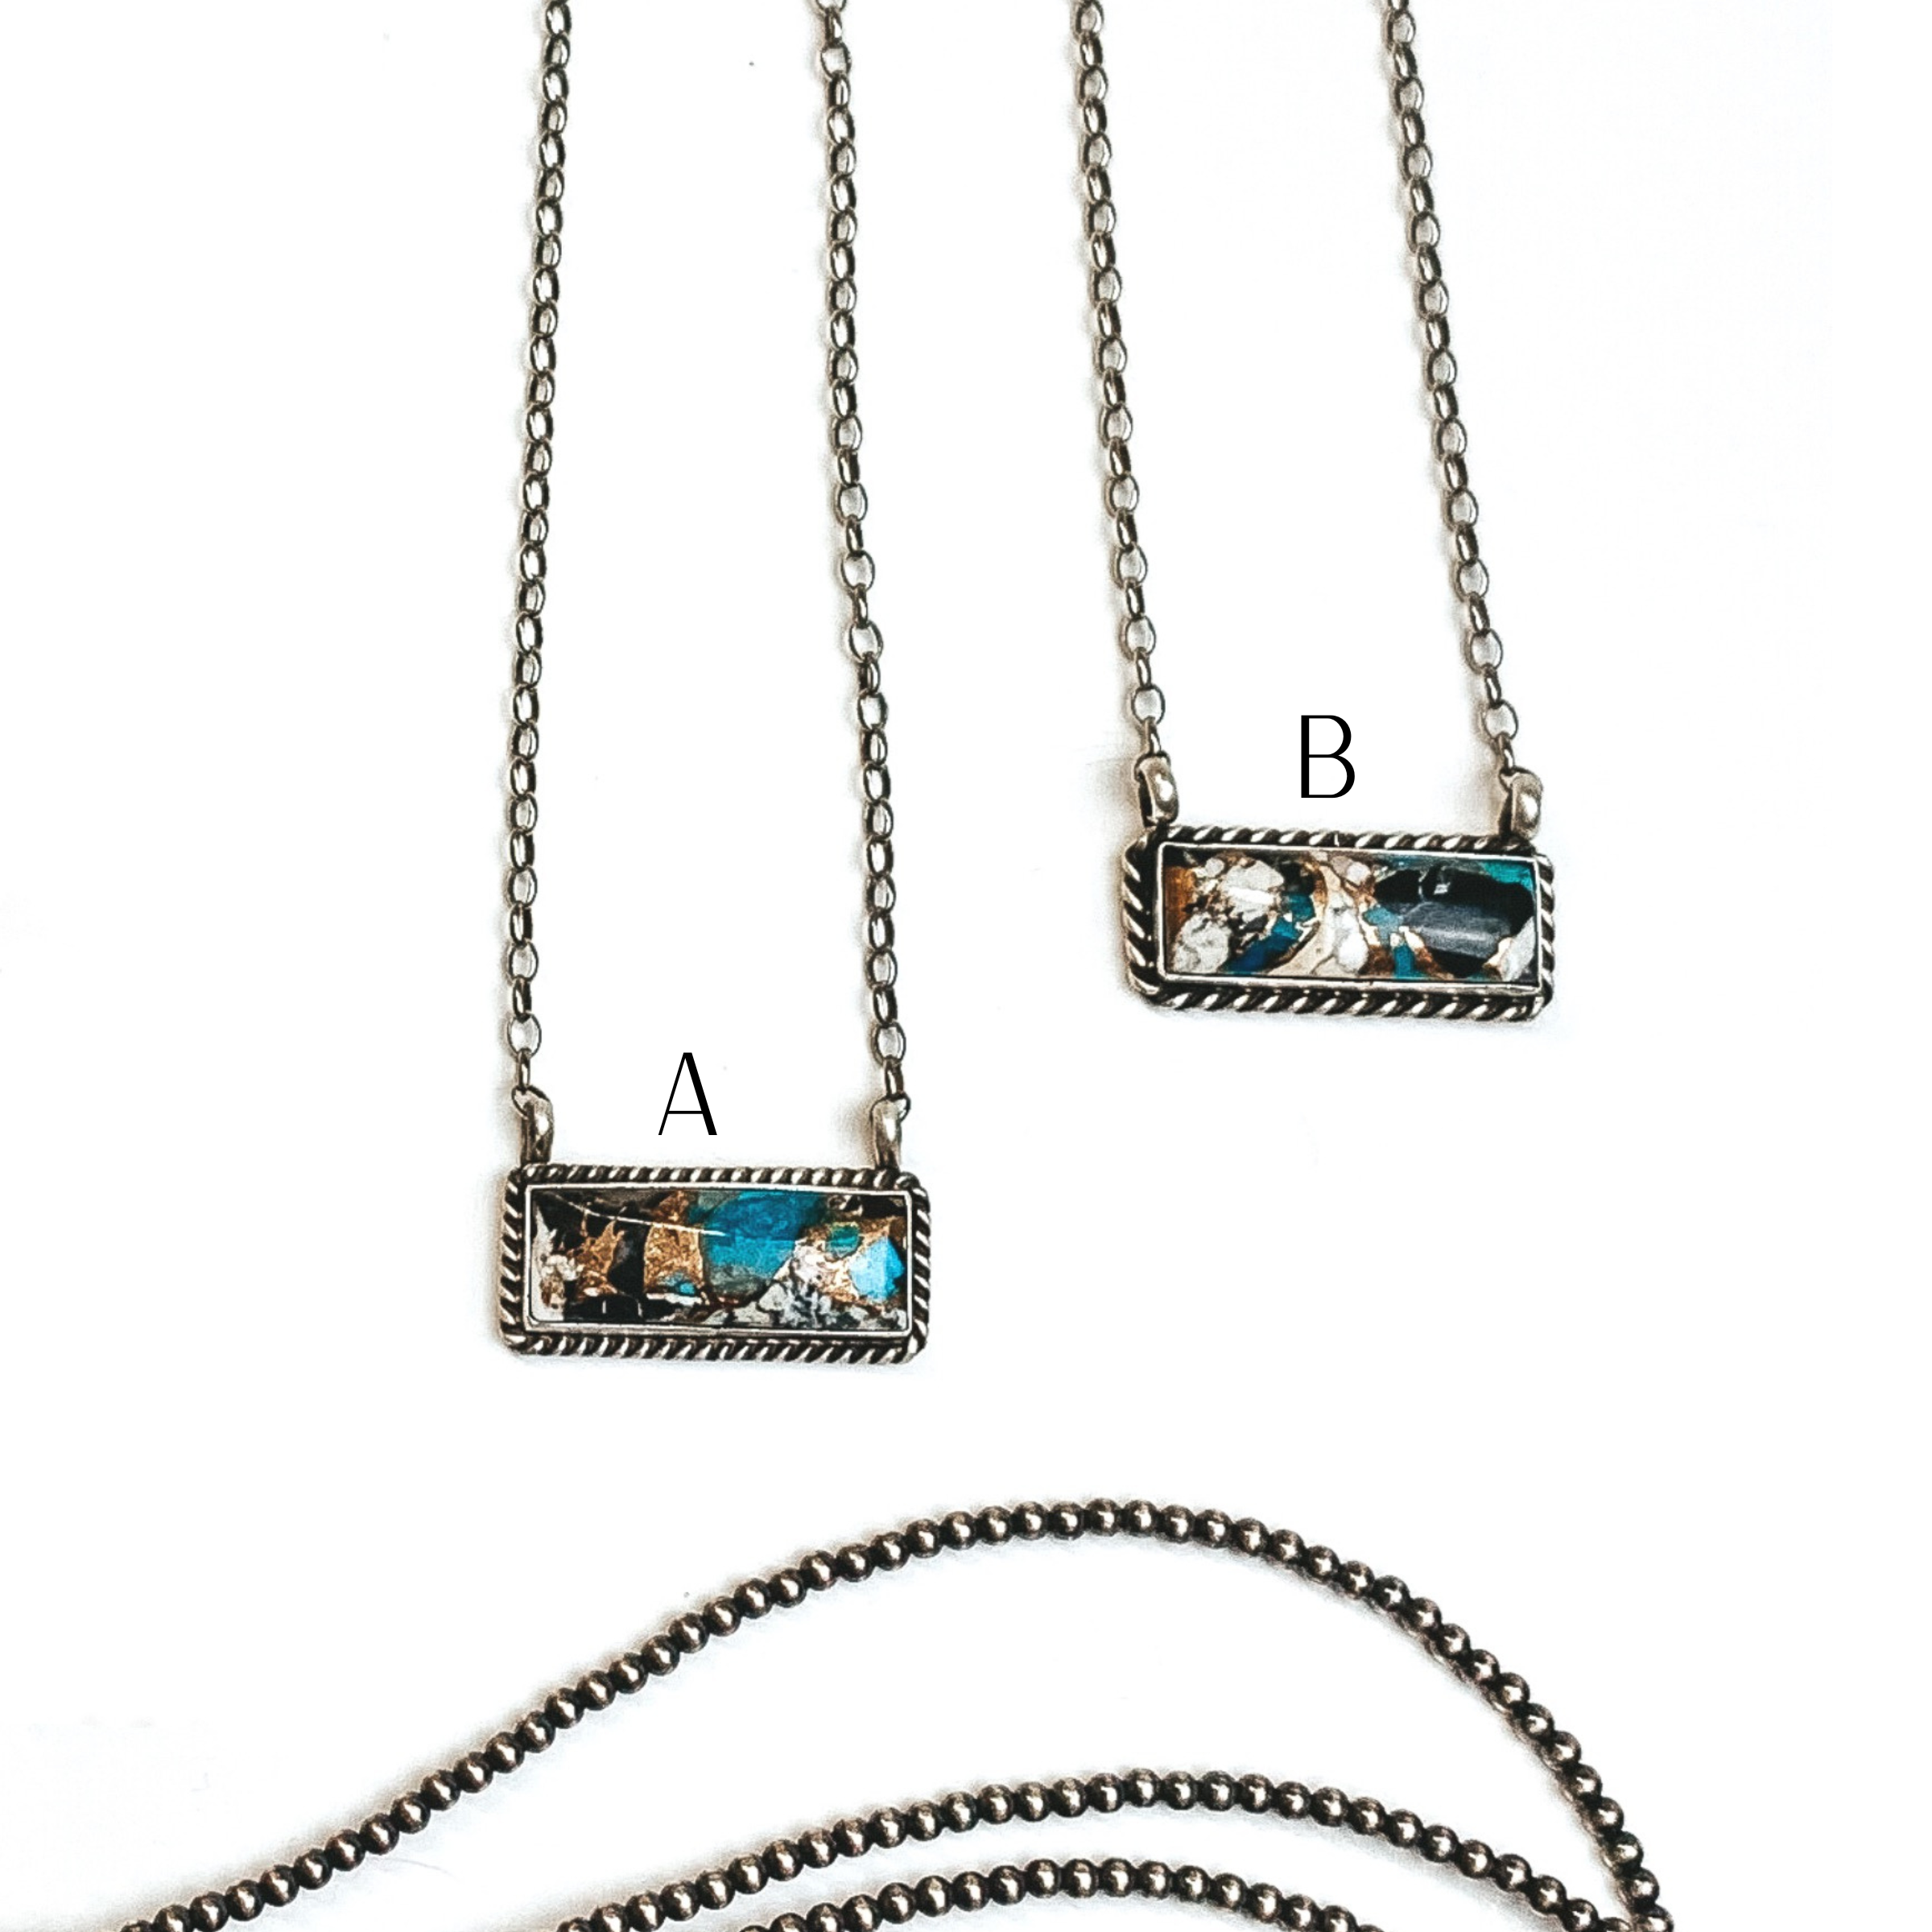 Two silver chain necklaces with rectangle bars that have a white buffalo and turquoise remix stone. These necklaces are pictured on a white background with silver beads under the necklaces.